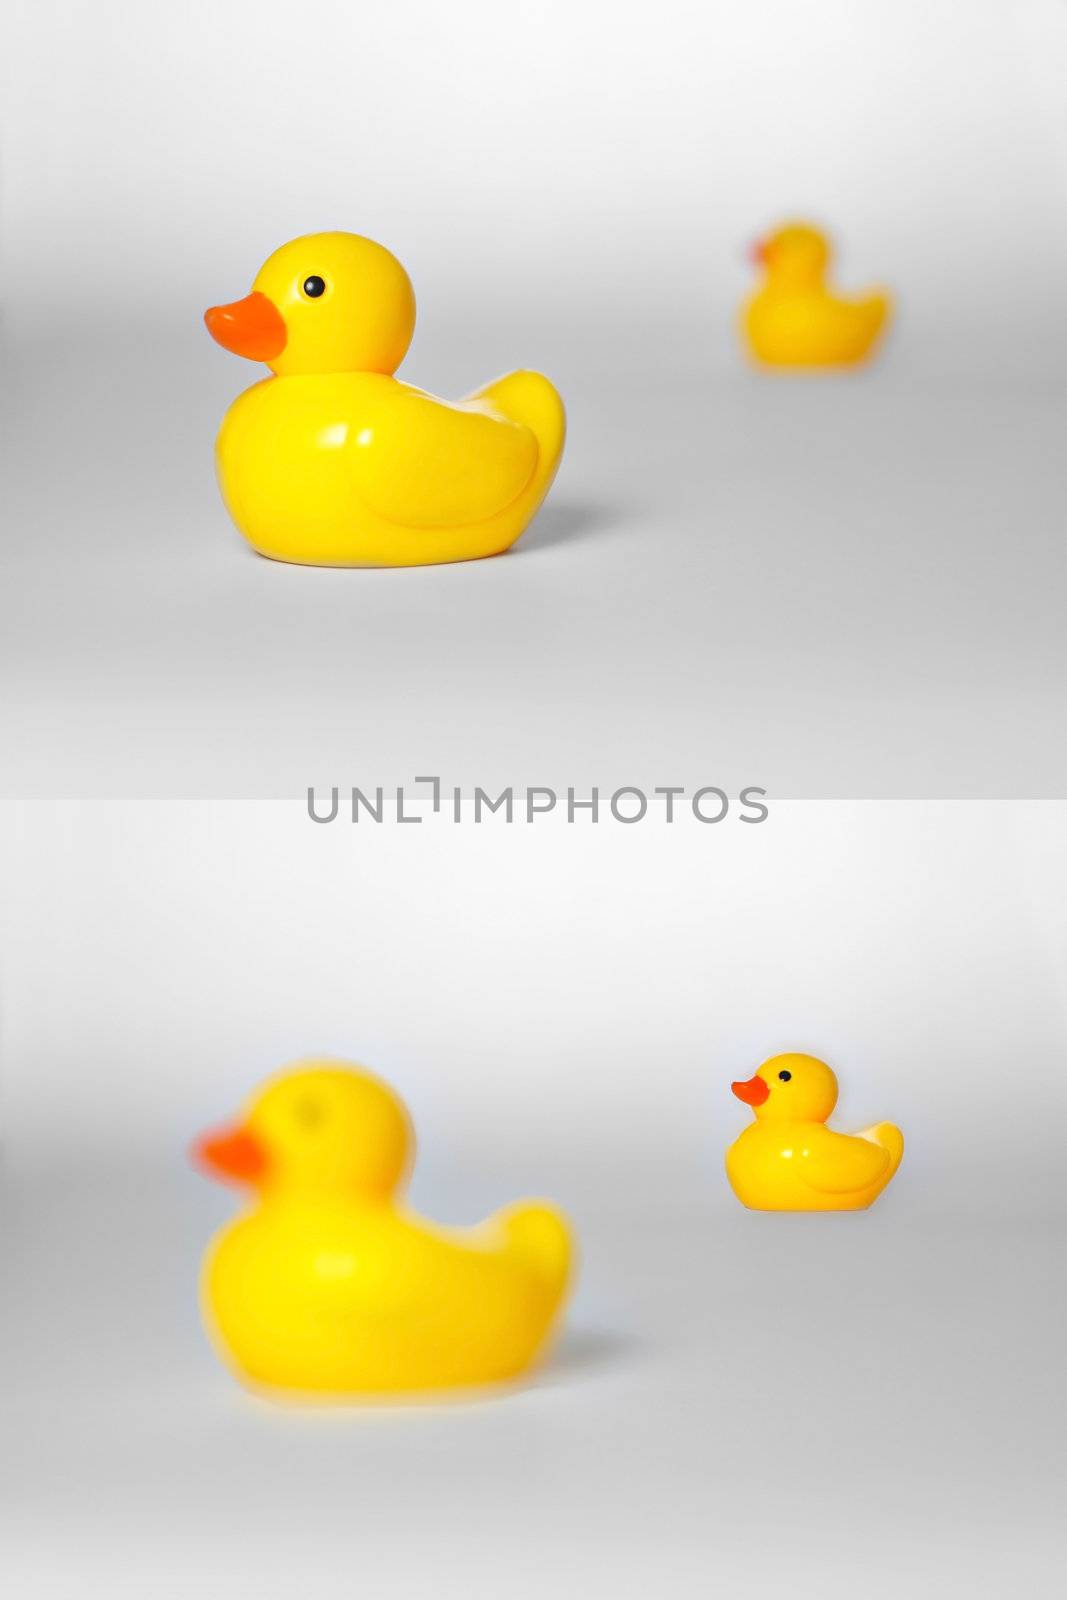 Shows the concept of Depth of Field using two rubber ducks